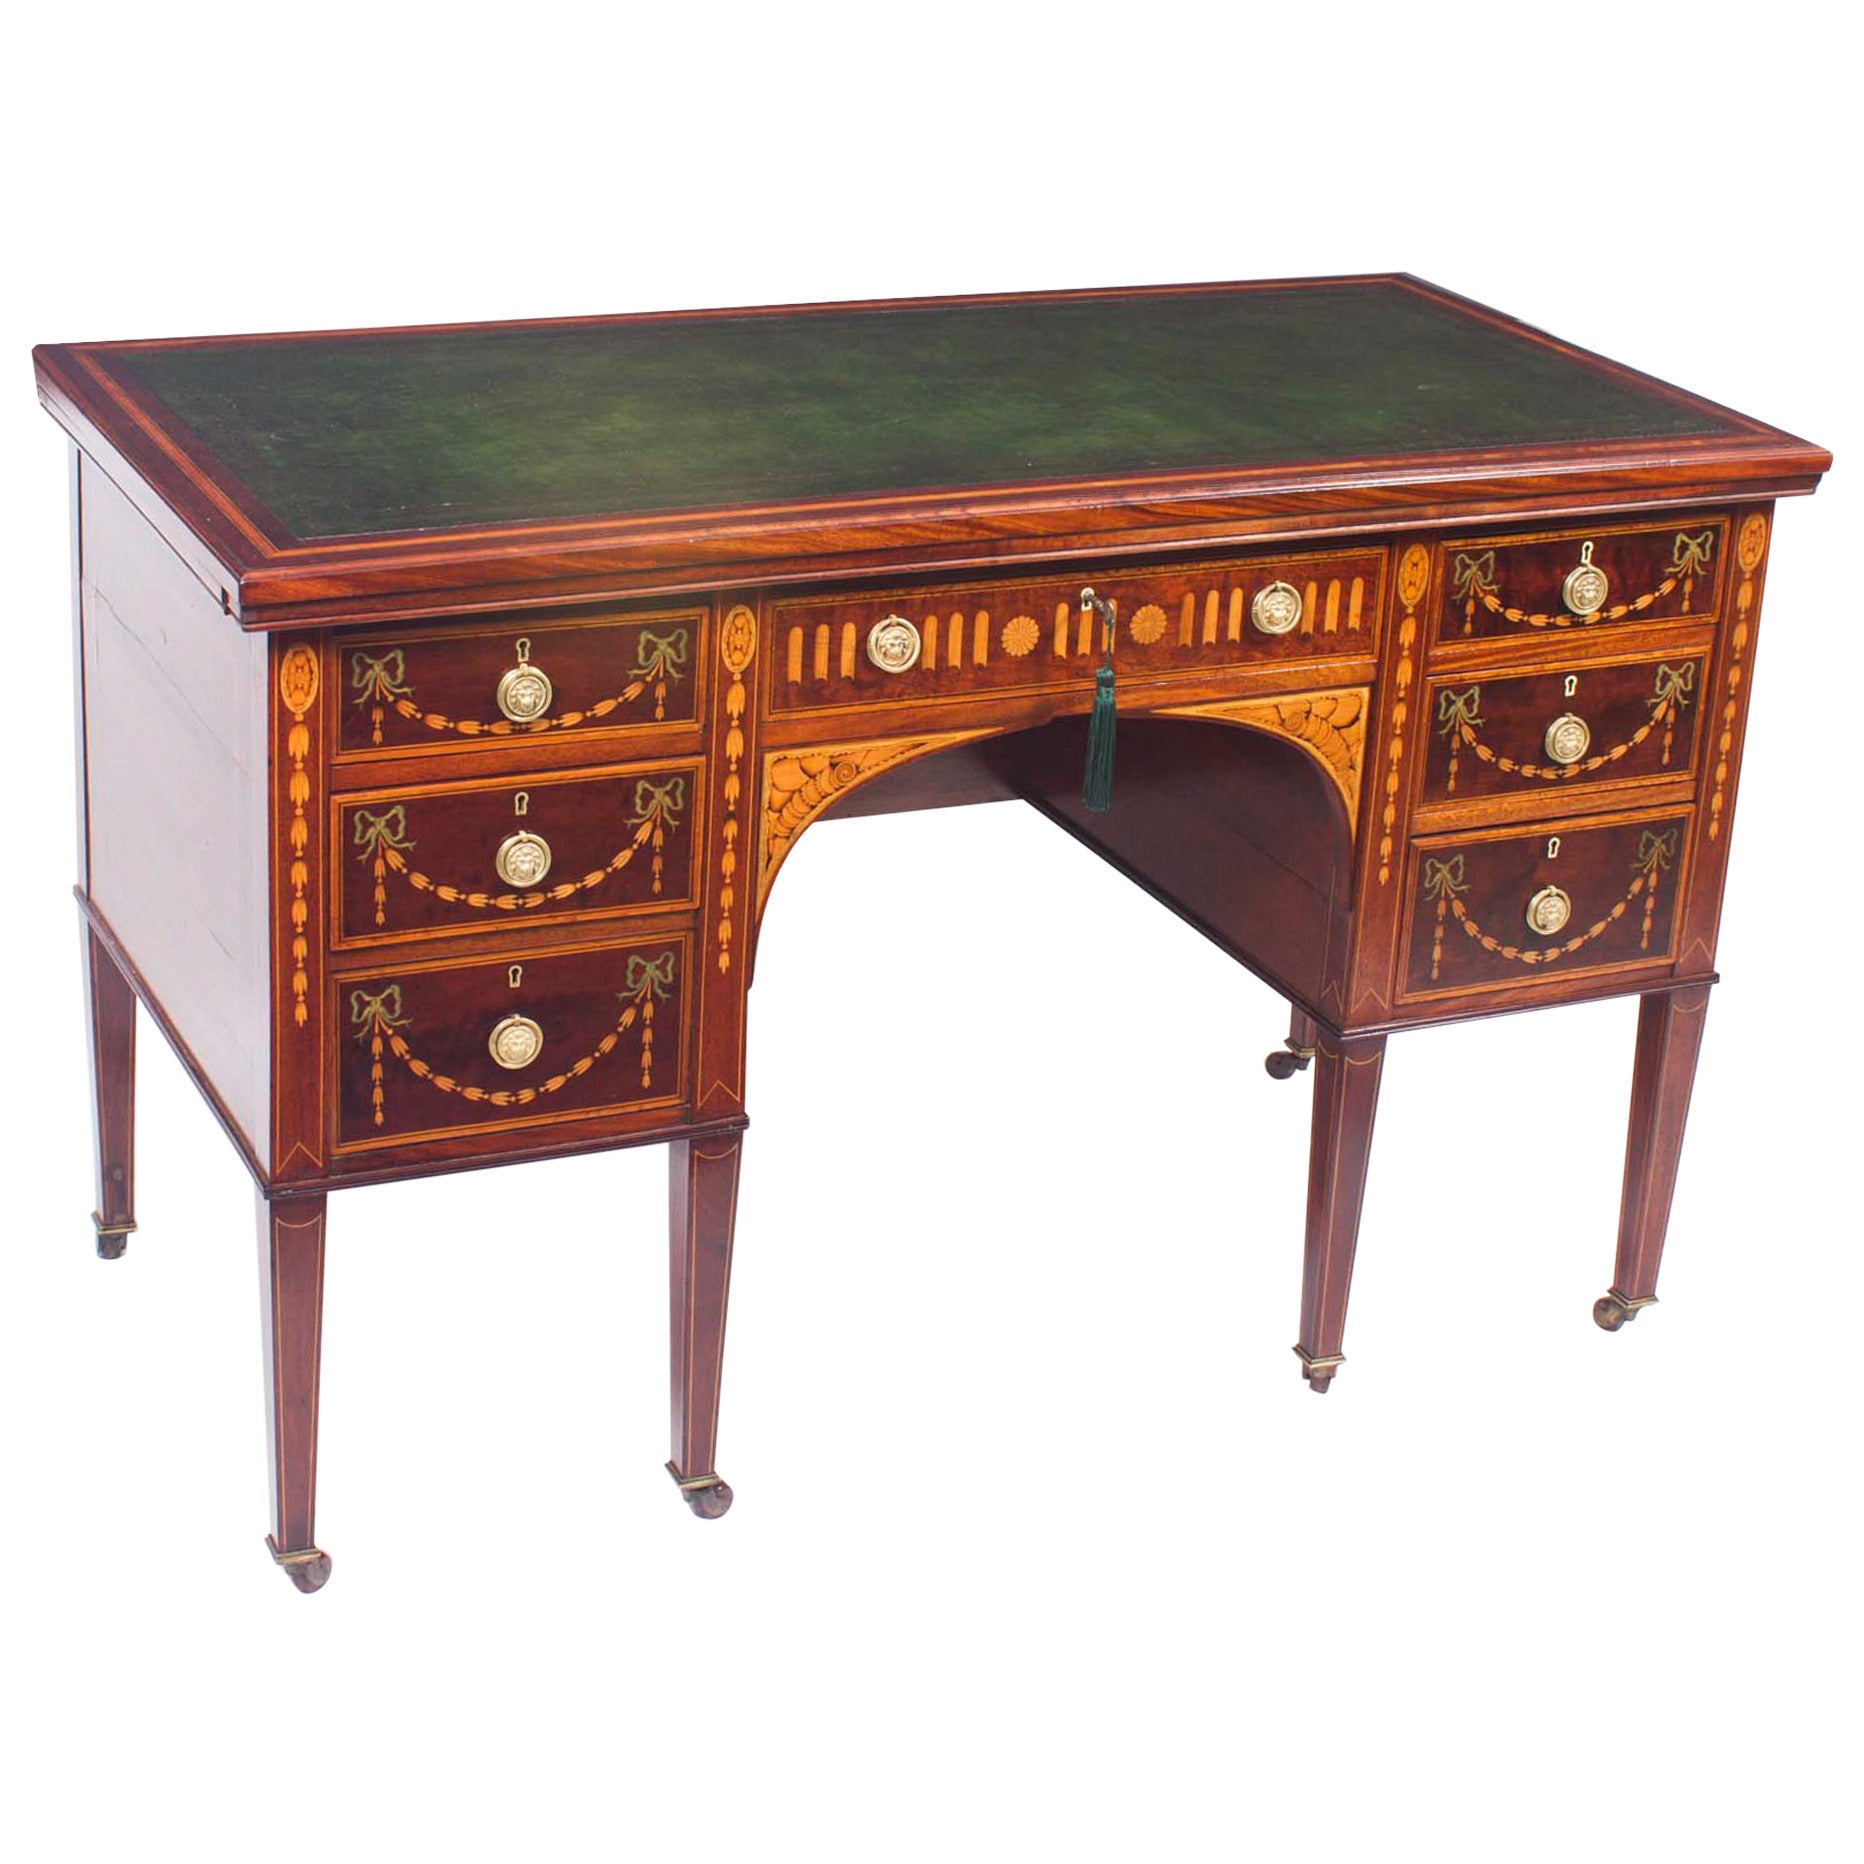 Early 20th Century Edwardian Inlaid Desk with Slides